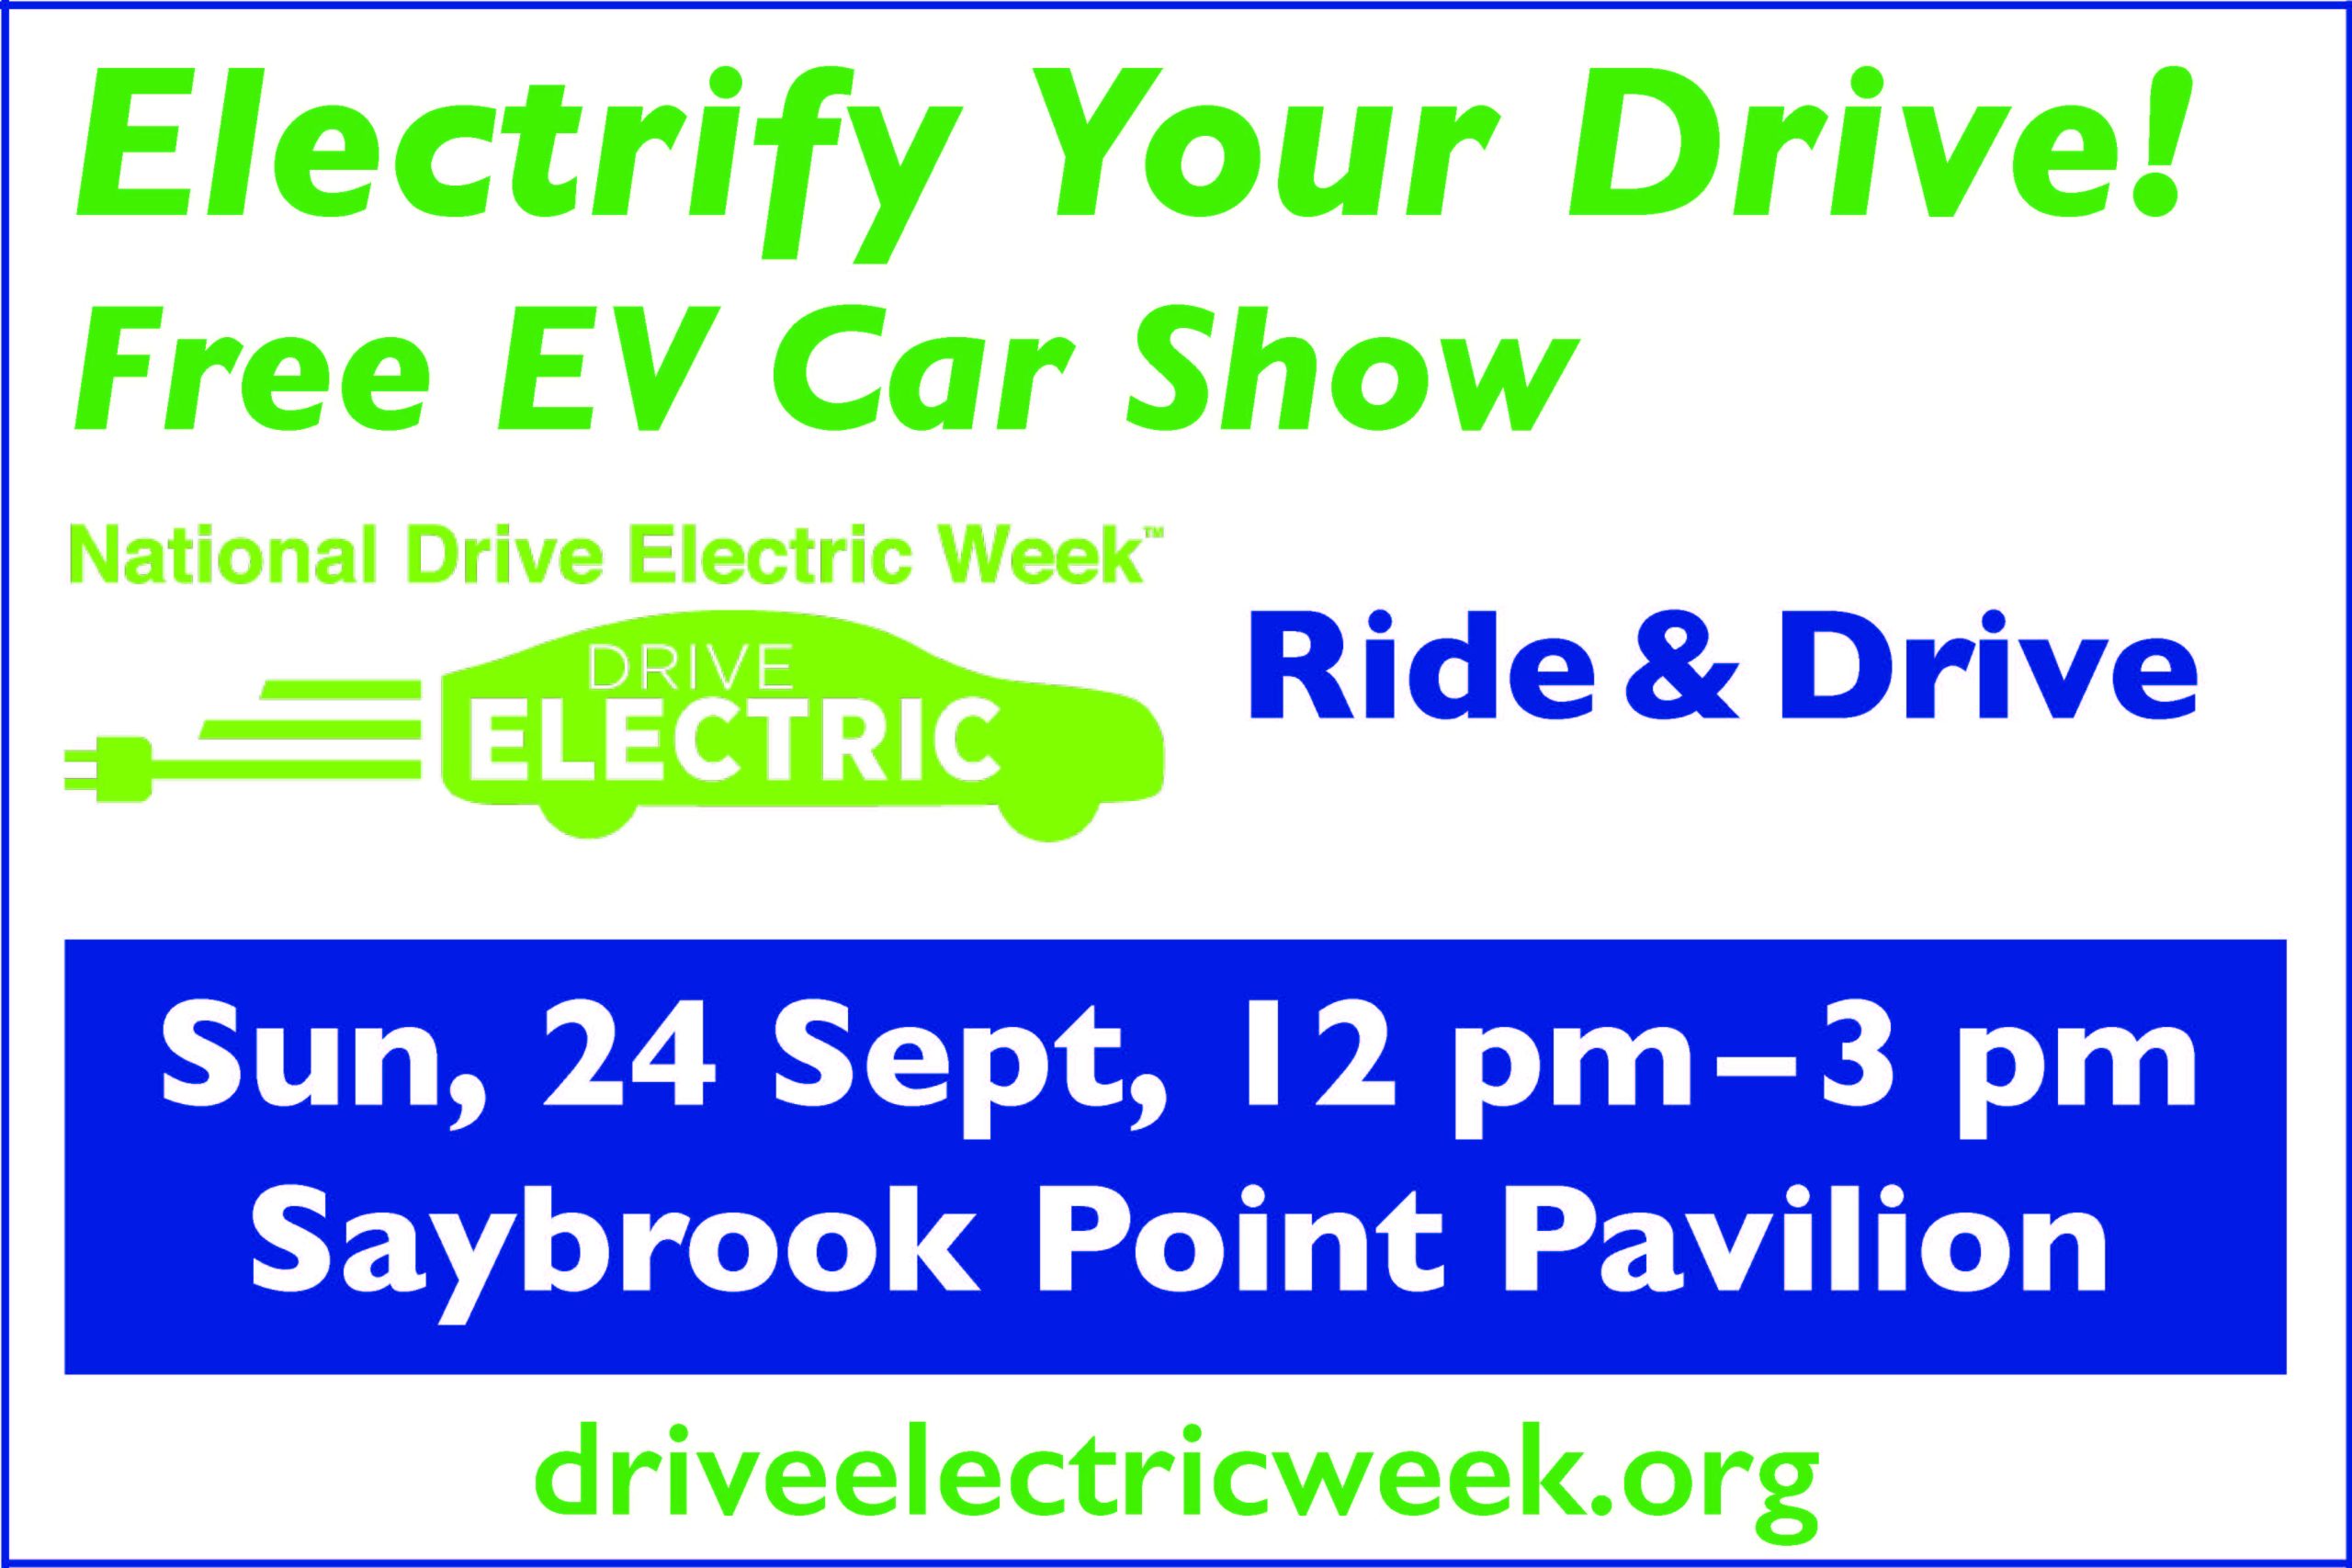 Drive Electric Week Event in Old Saybrook